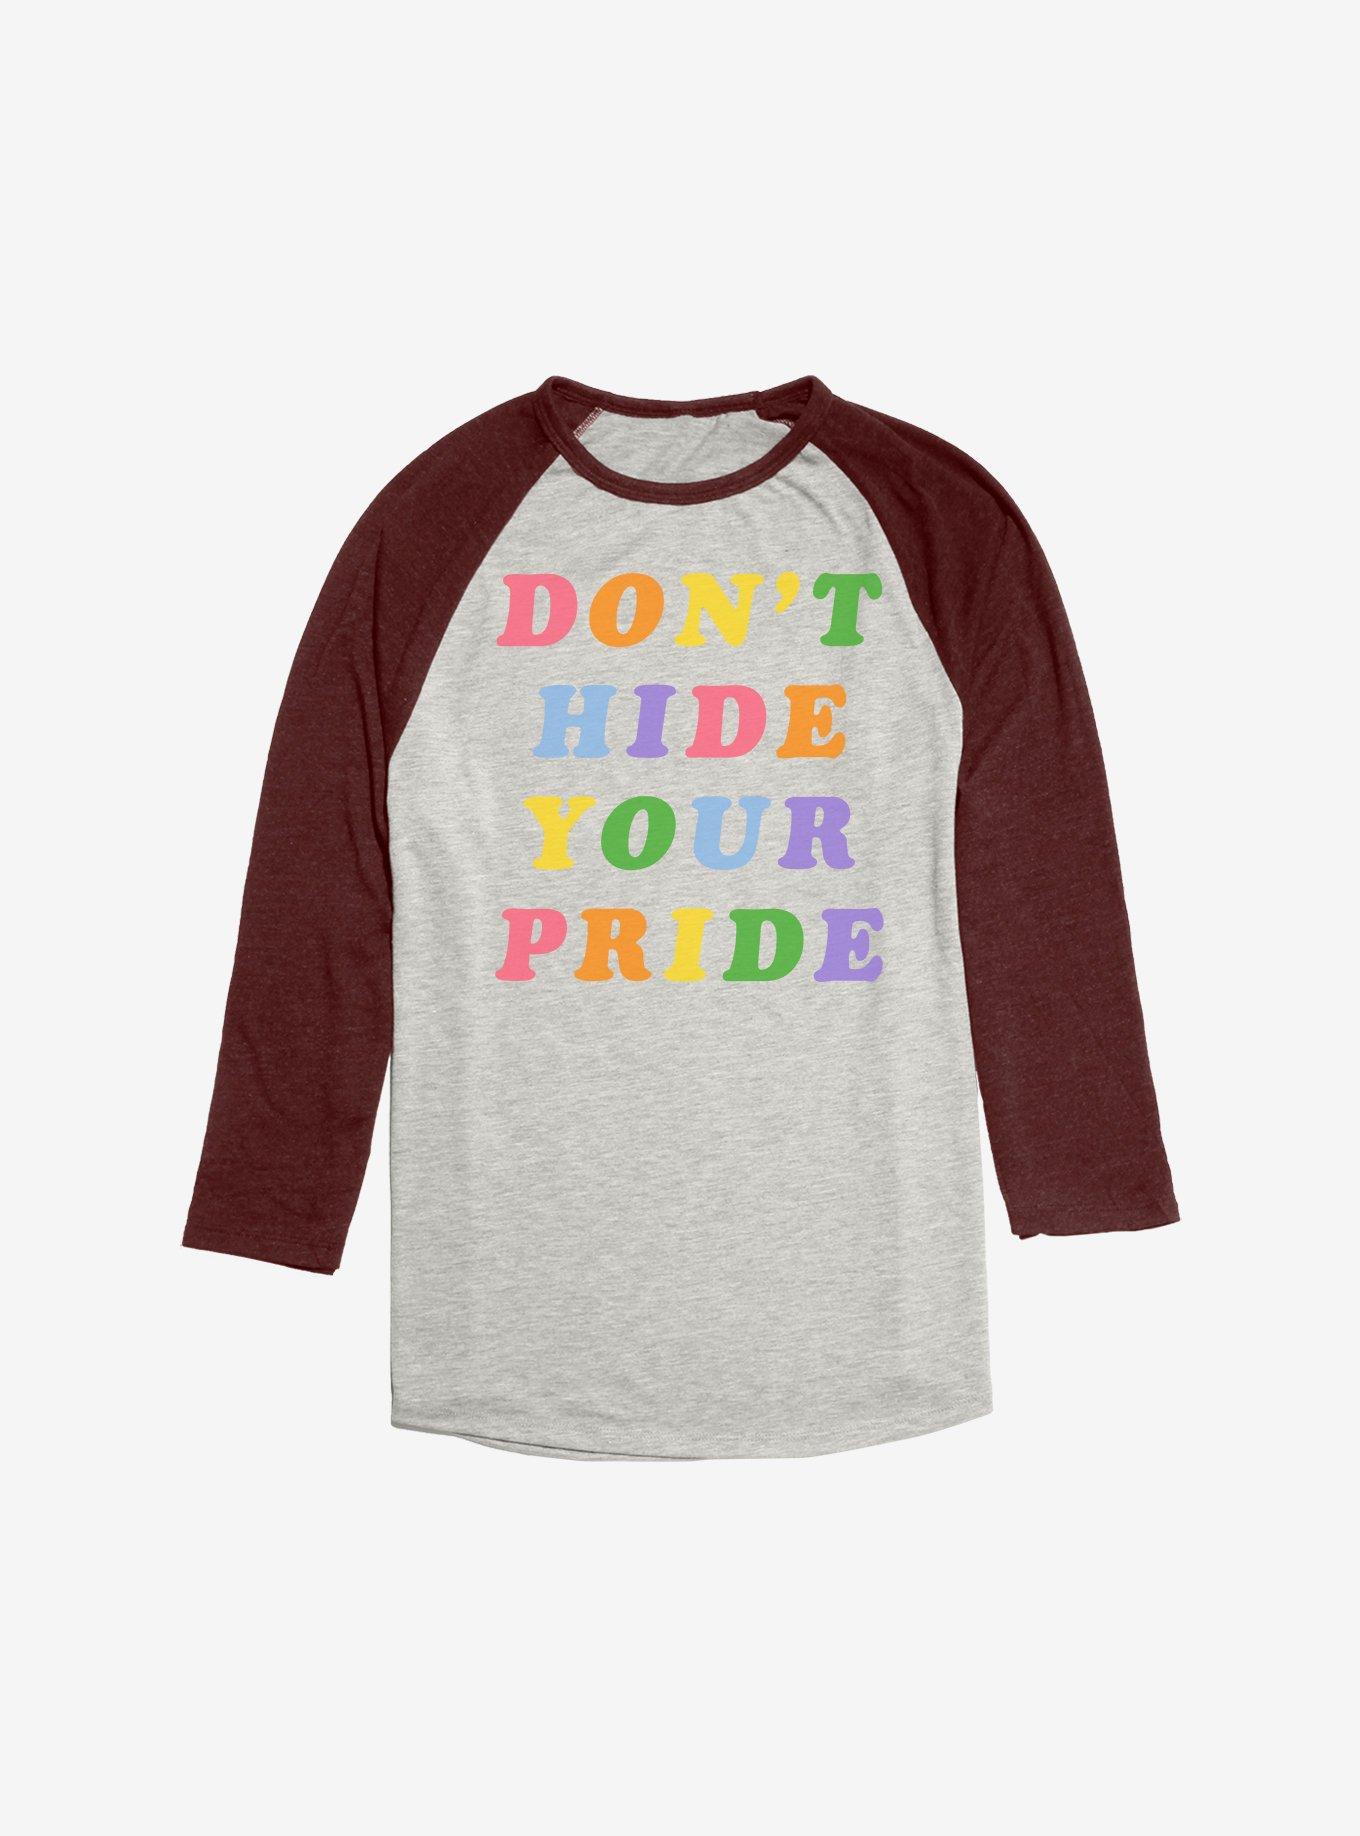 Don't Hide Your Pride Raglan, Oatmeal With Maroon, hi-res